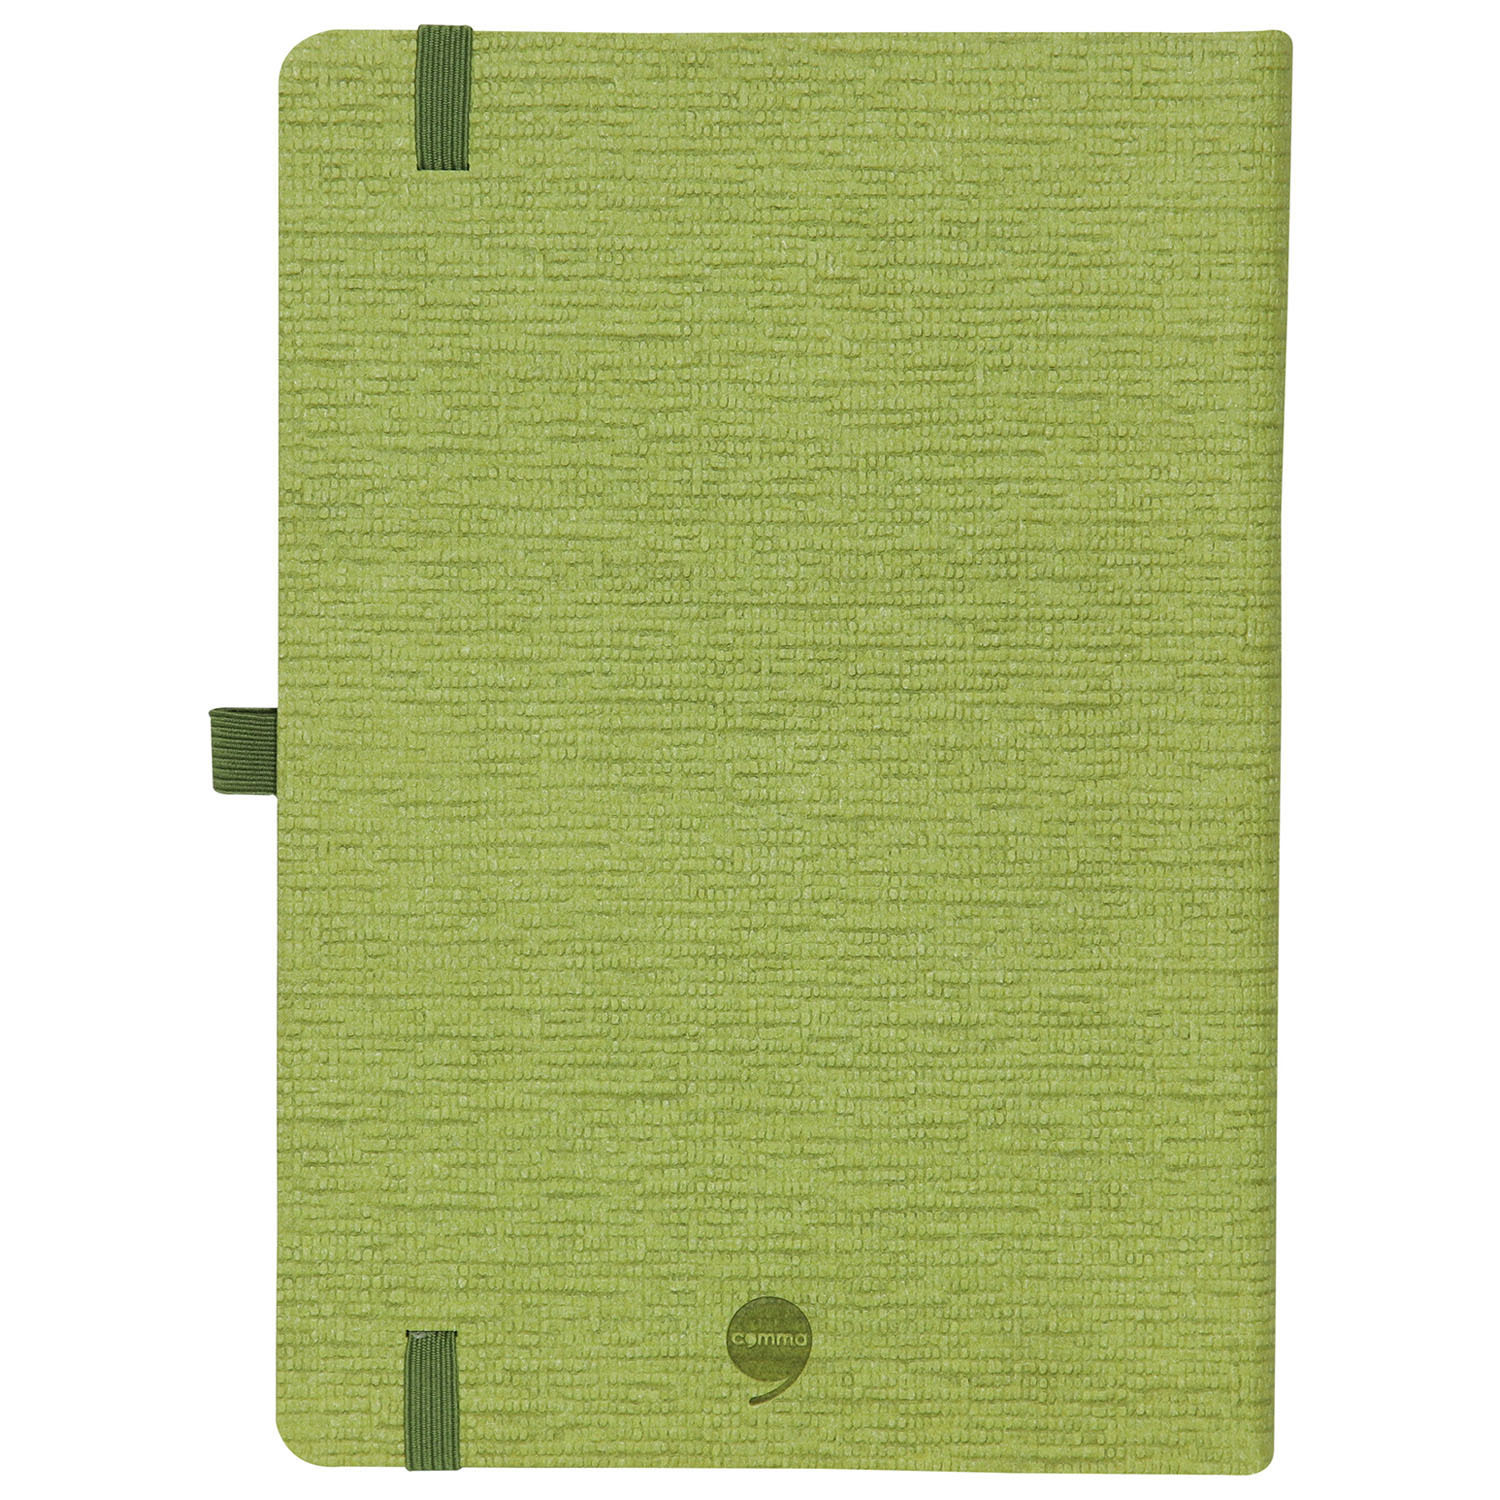 Comma Abaca - A5 Size - Hard Bound Notebook (Green)